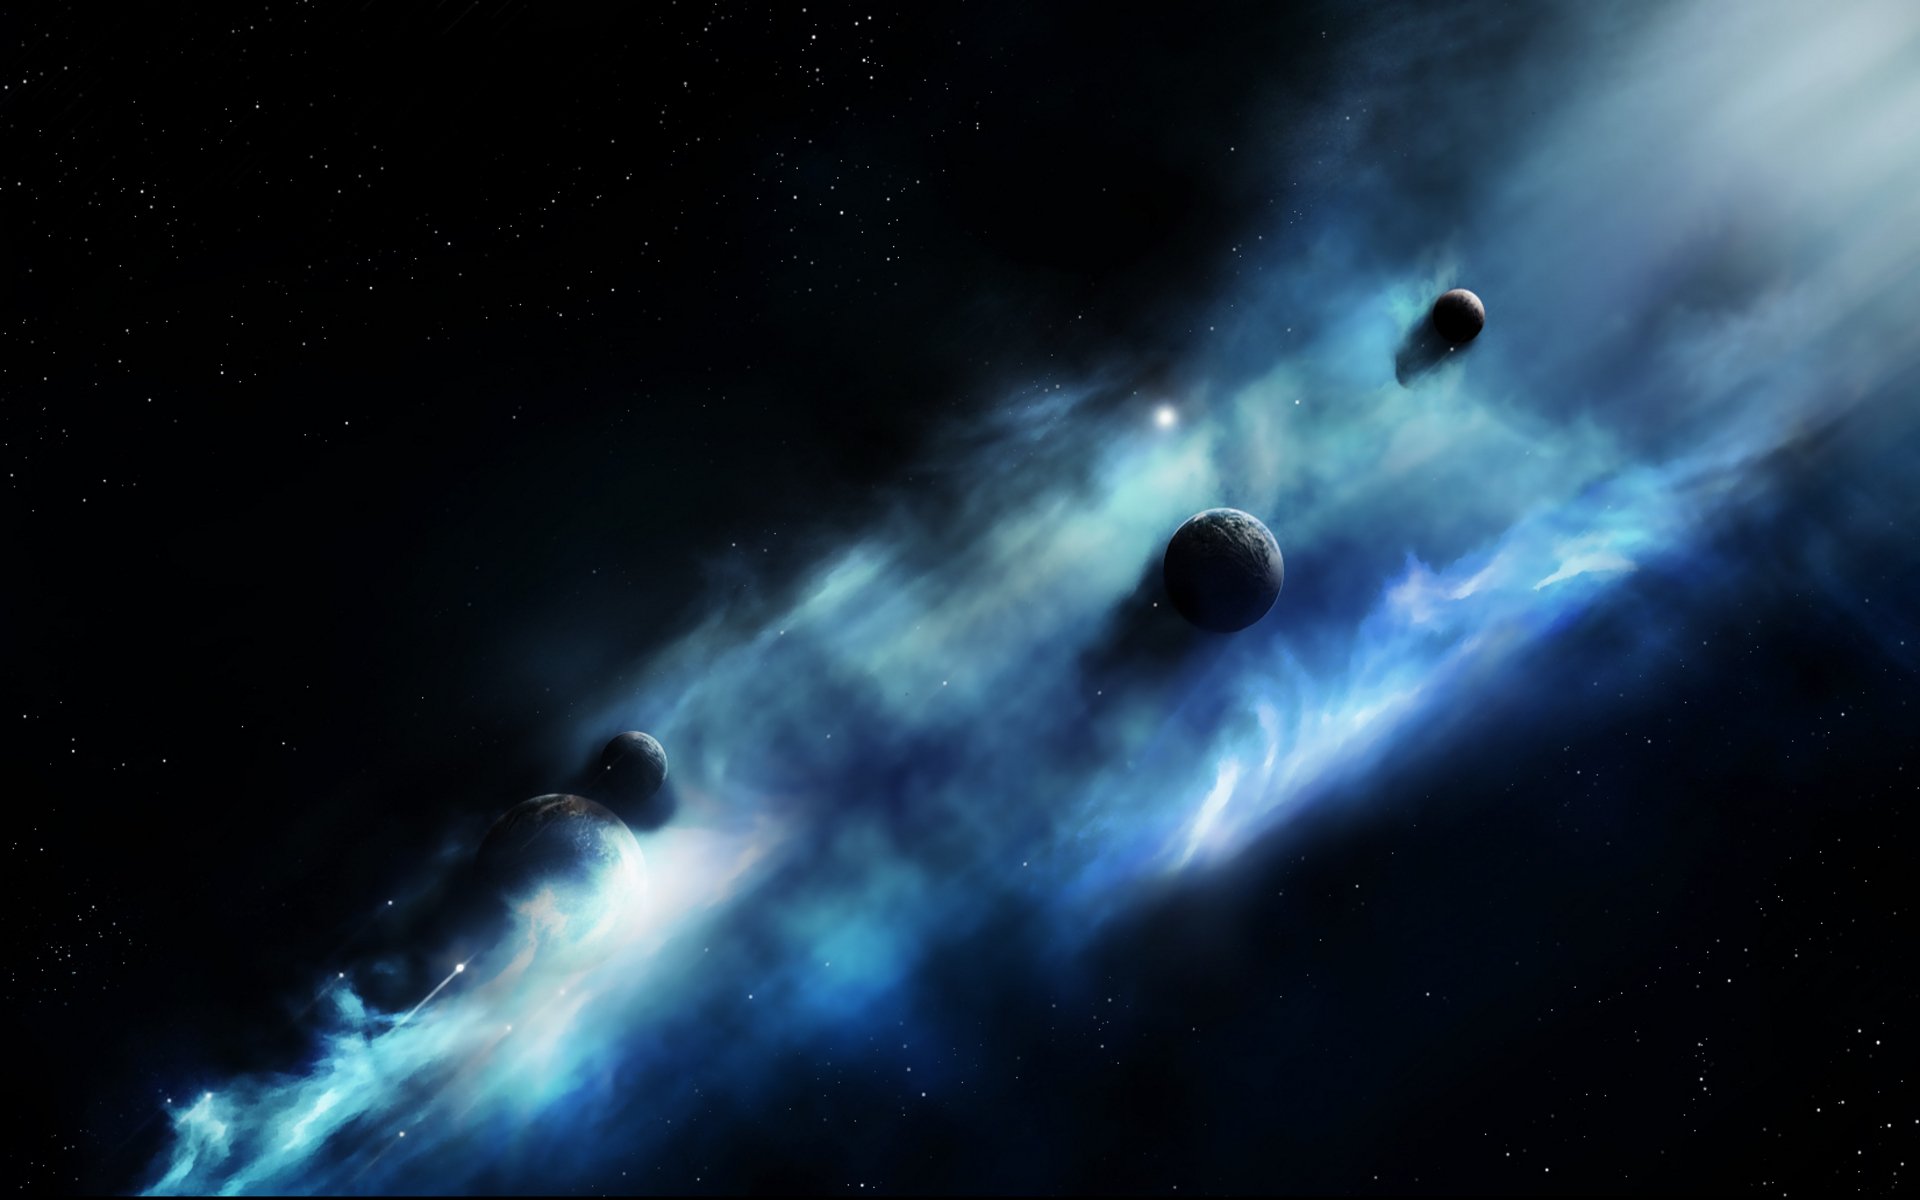  download 3d Space Scene Black Wallpaper [1920x1200] for your 1920x1200